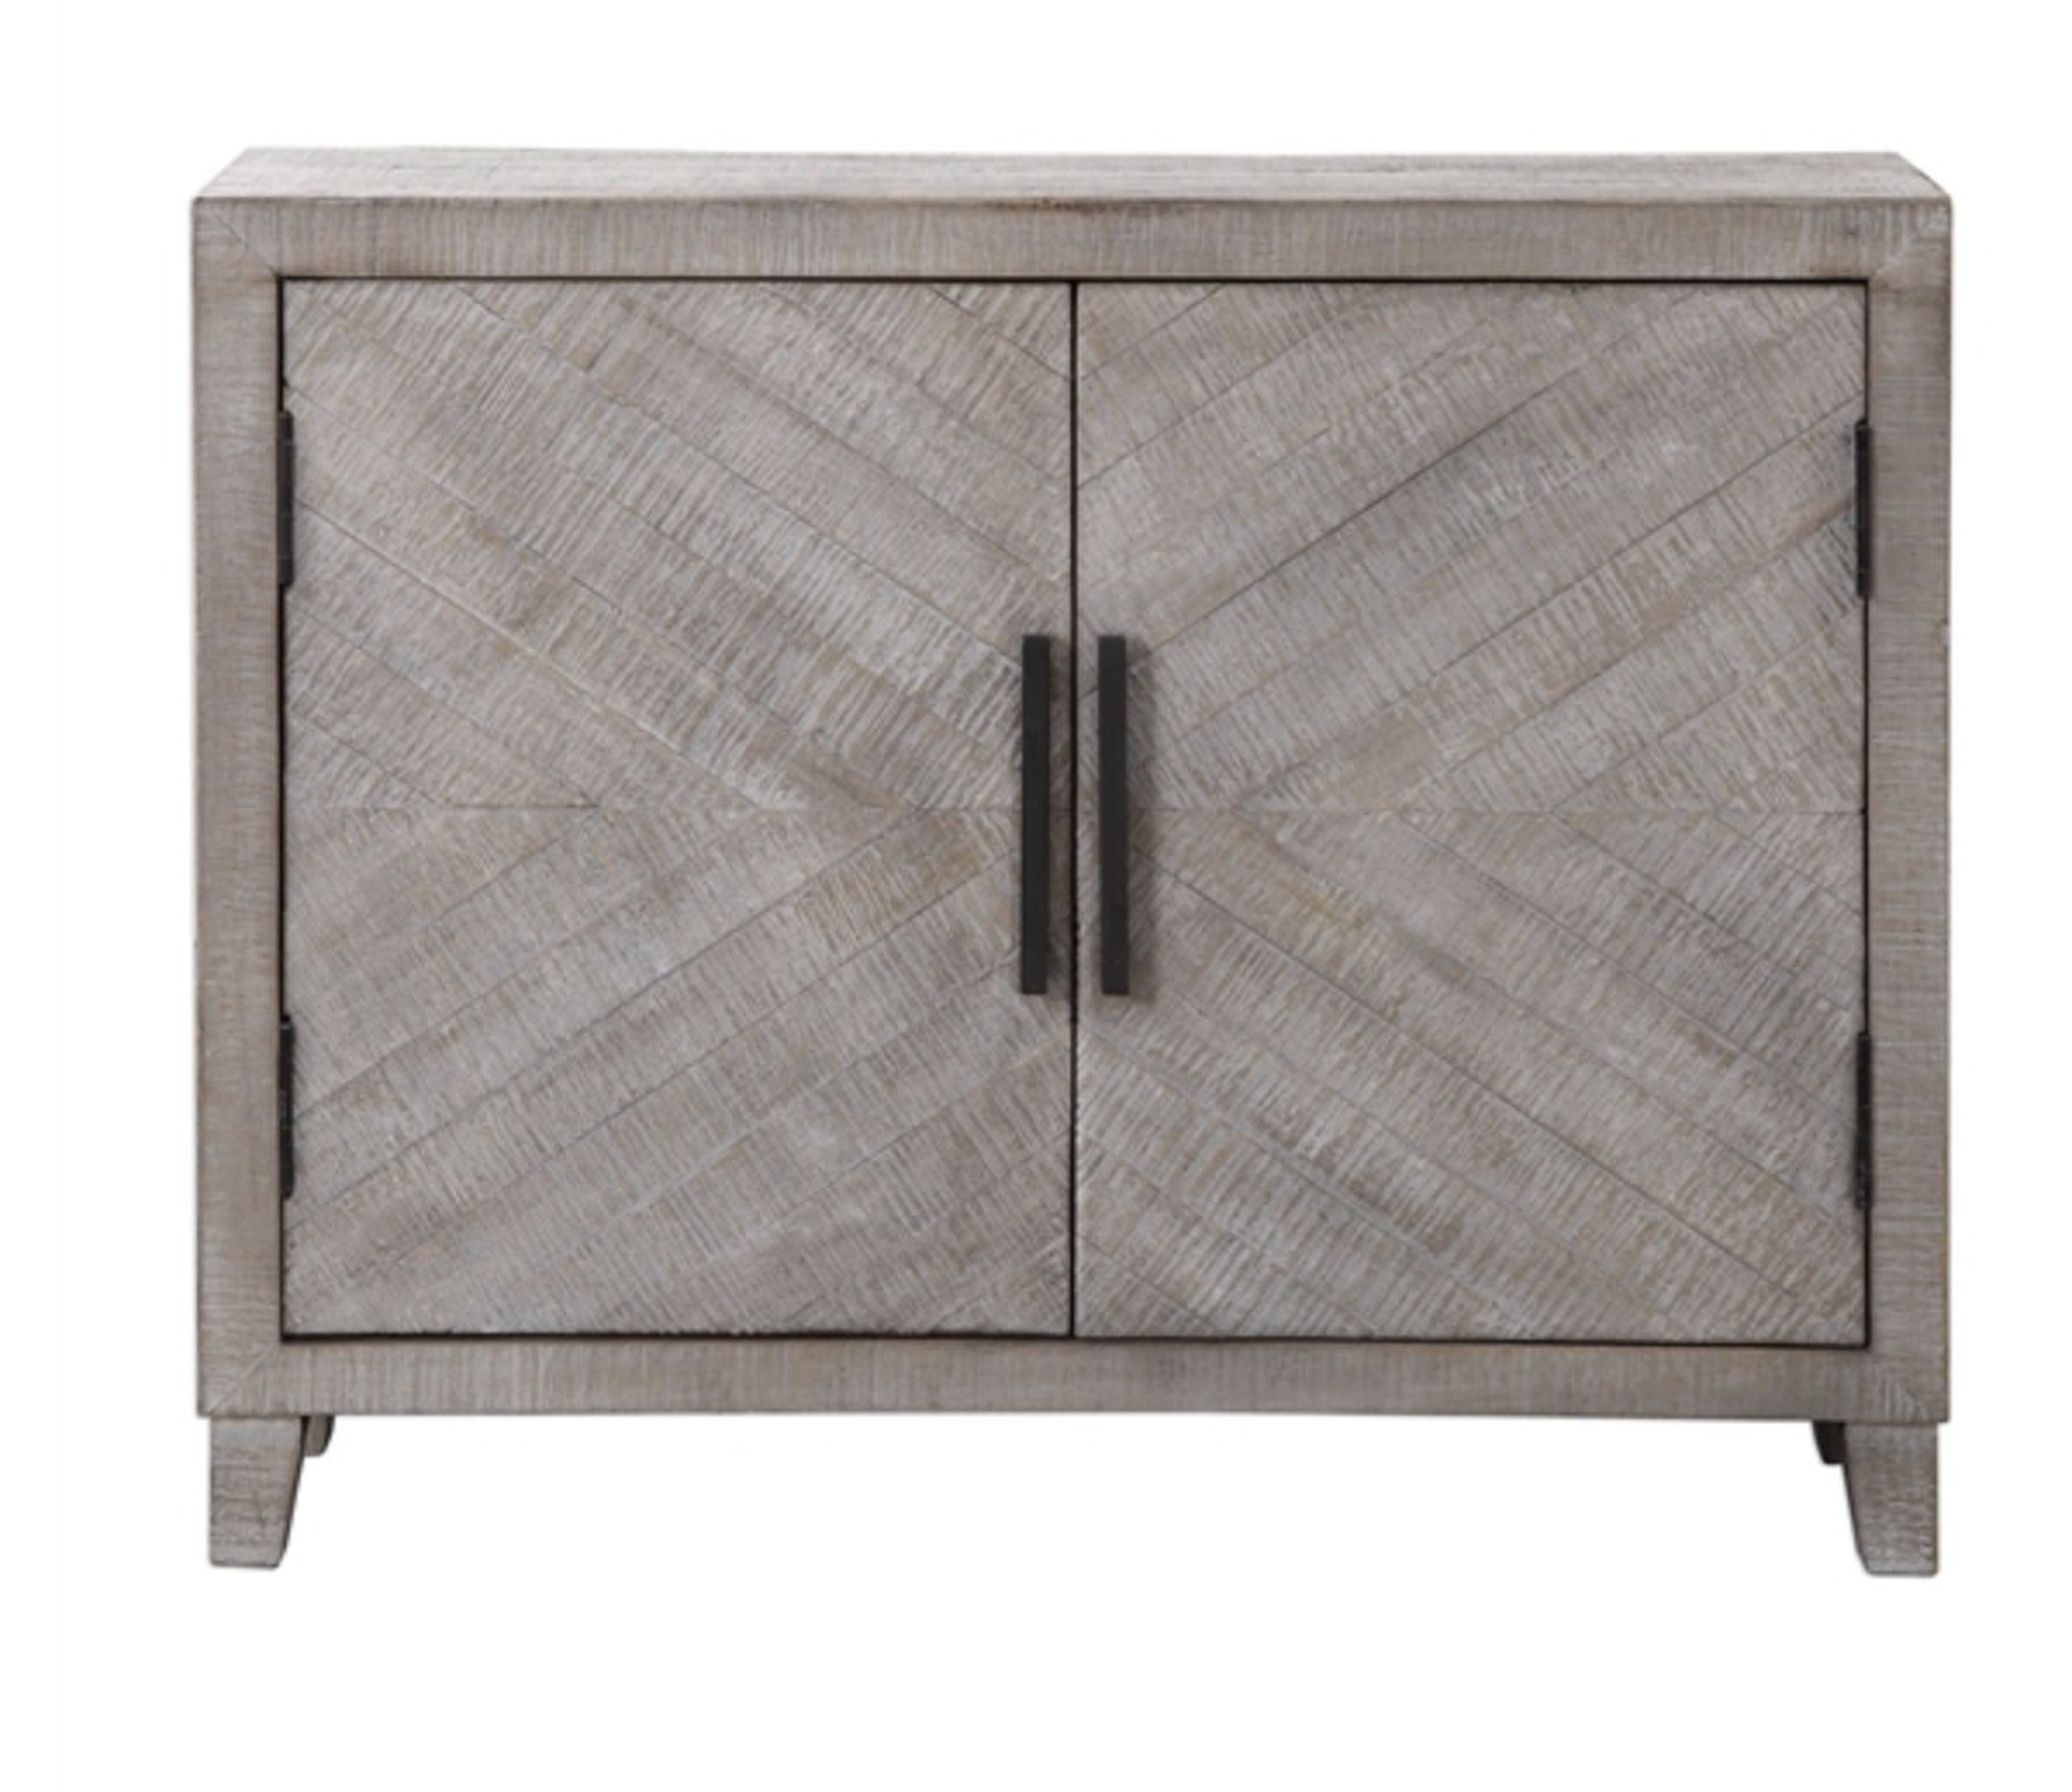 Adalind Accent Cabinet - Hudsonhill Foundry